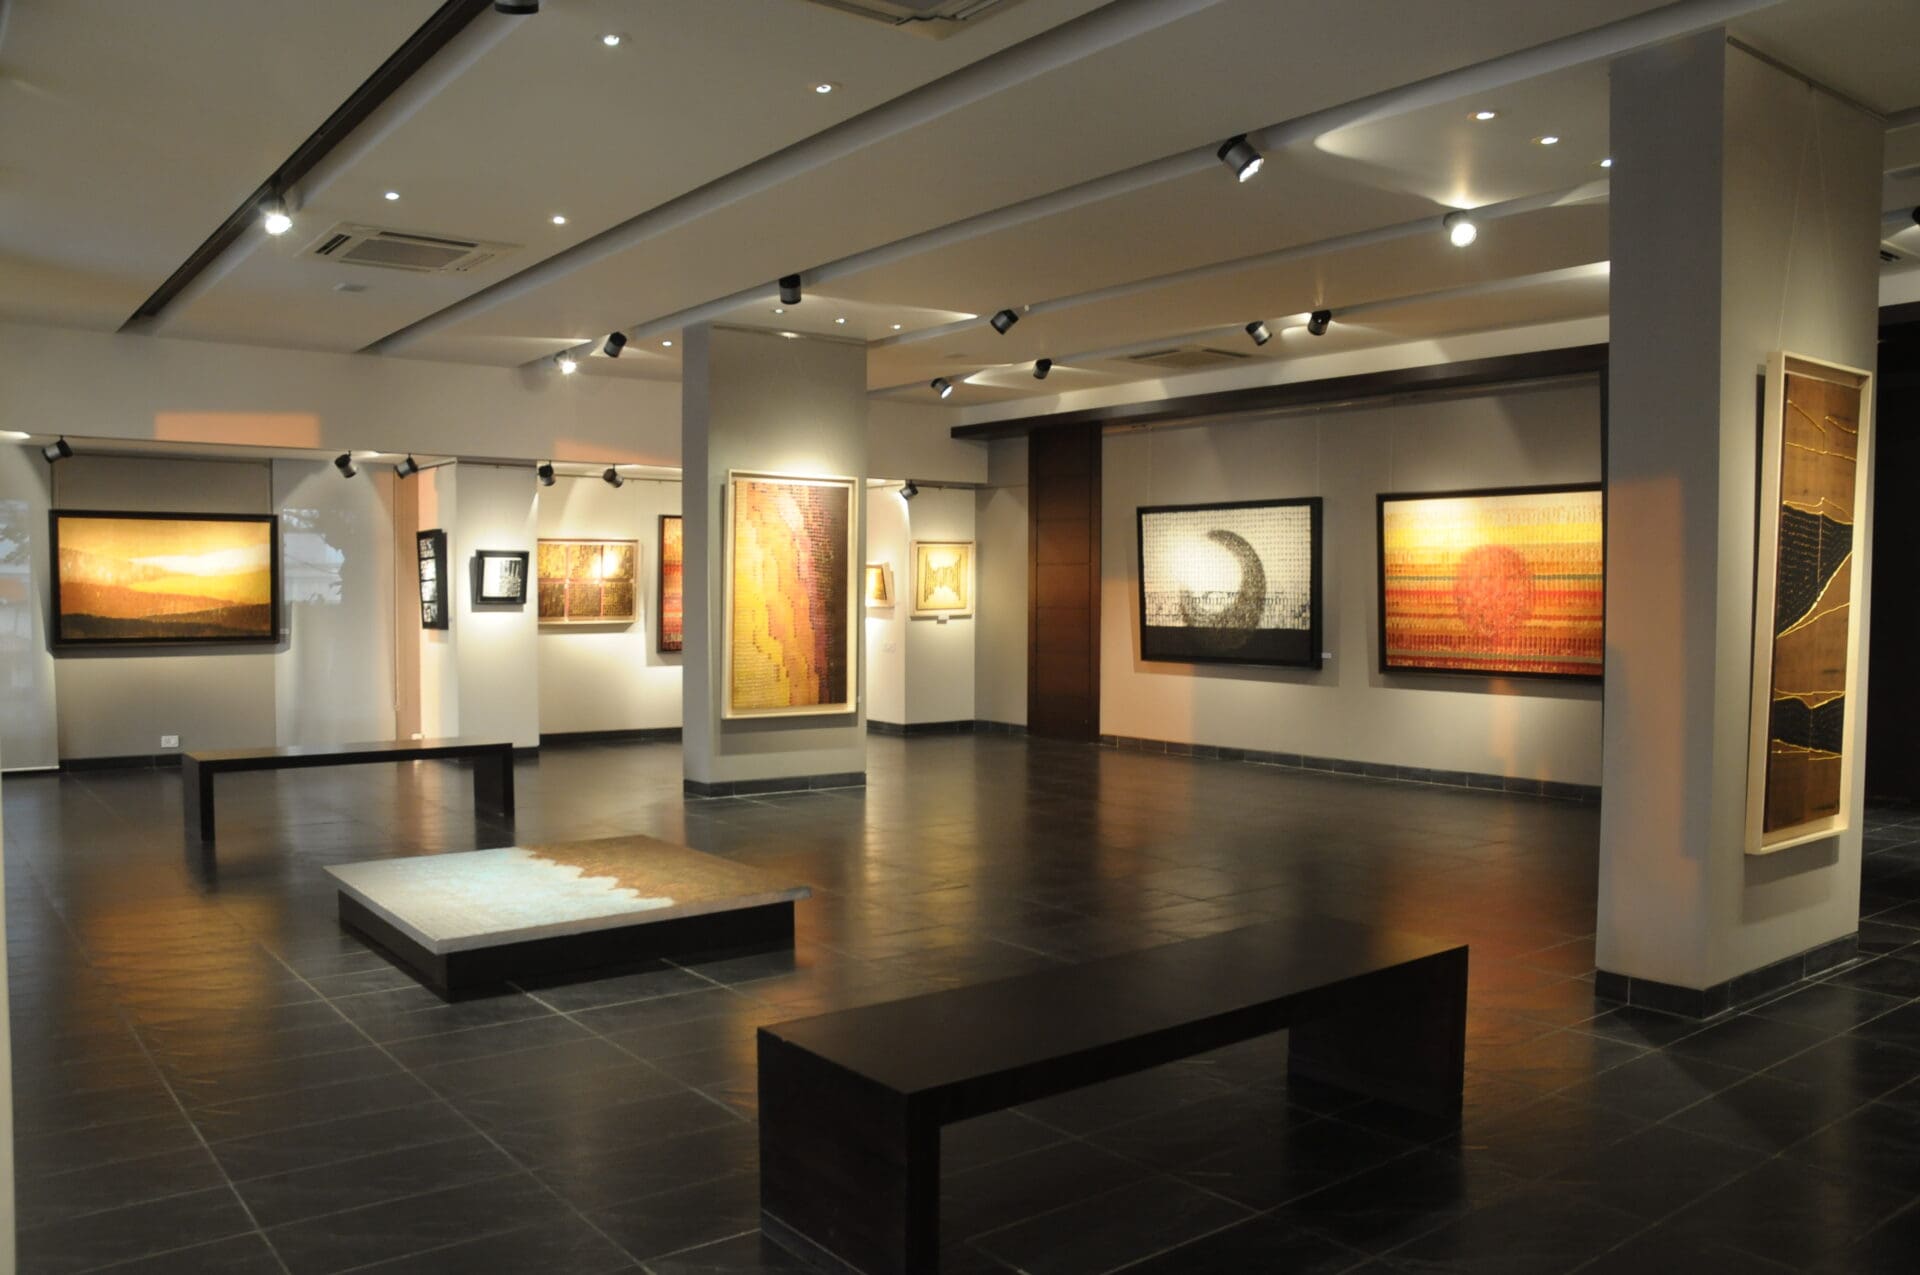 Best art galleries in Mumbai | A view of a gallery inside Tao Art Gallery, with works hung on the walls, and some benches in the centre of the room.